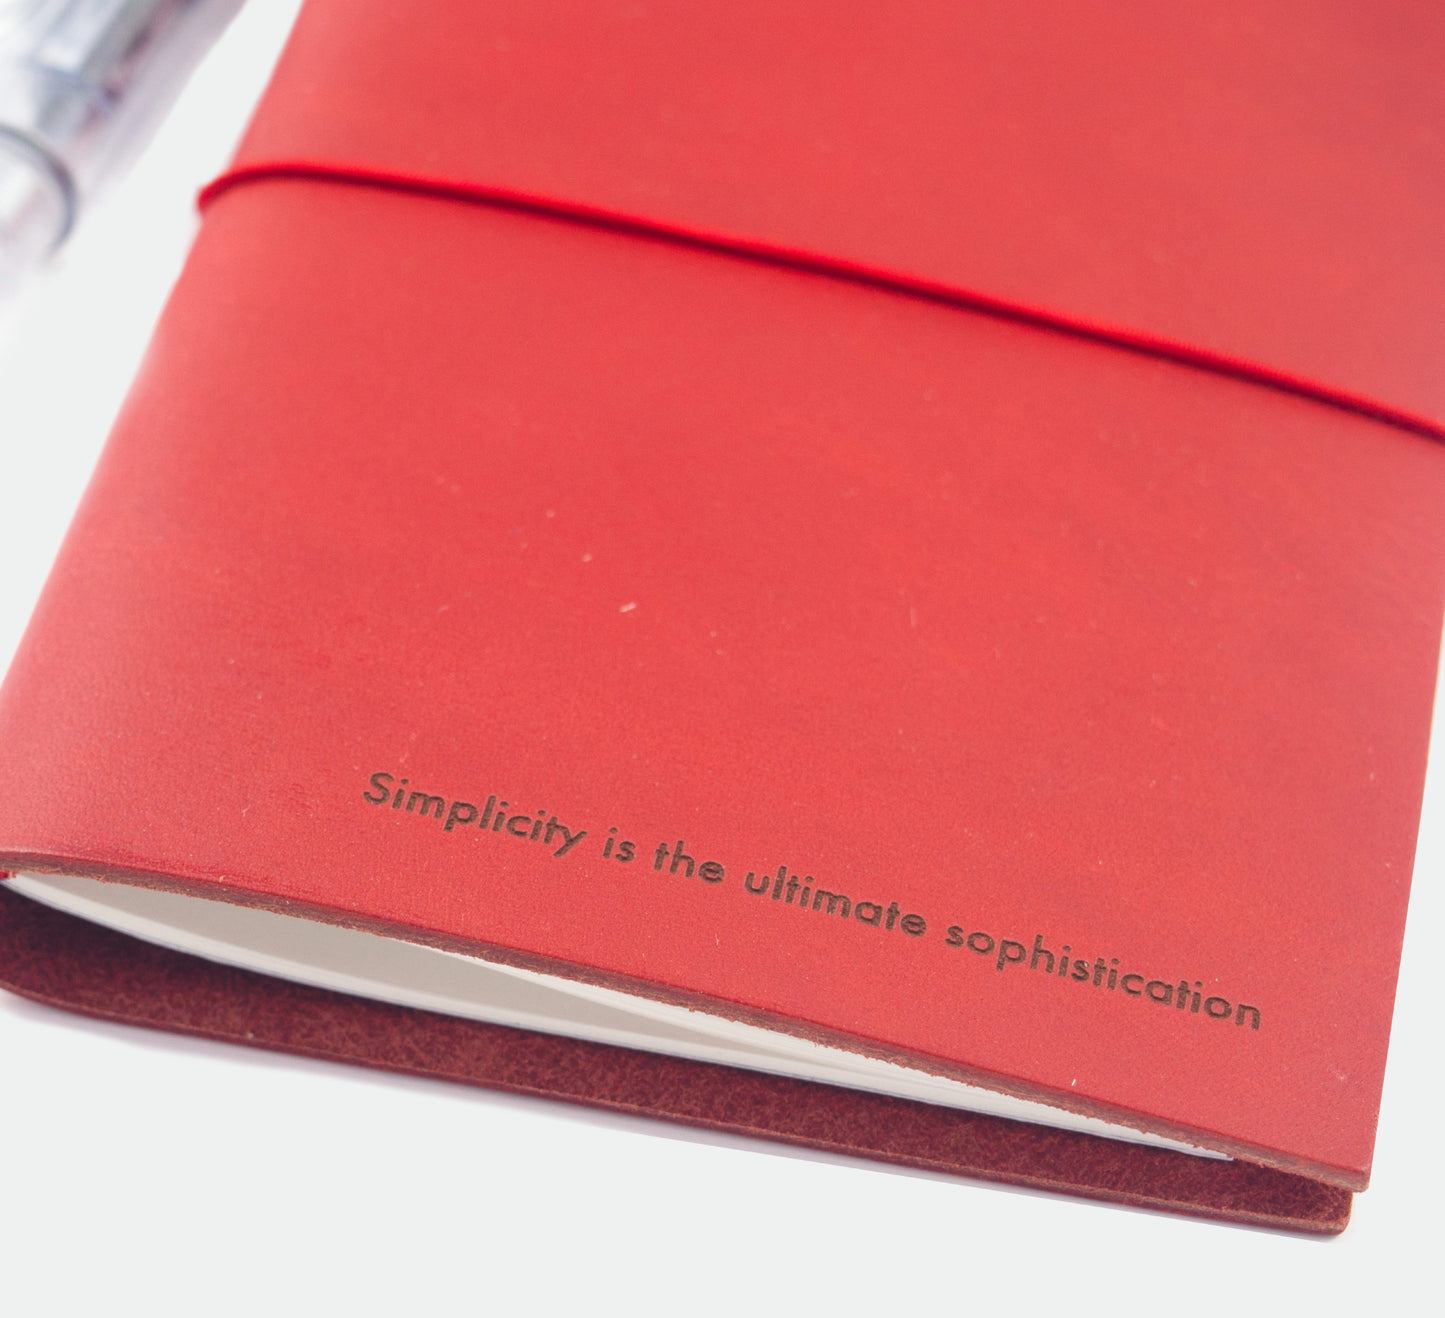 Simplicity is... A5 Leather Journal kit - Red  beamalevich architecture gift design gift art gift